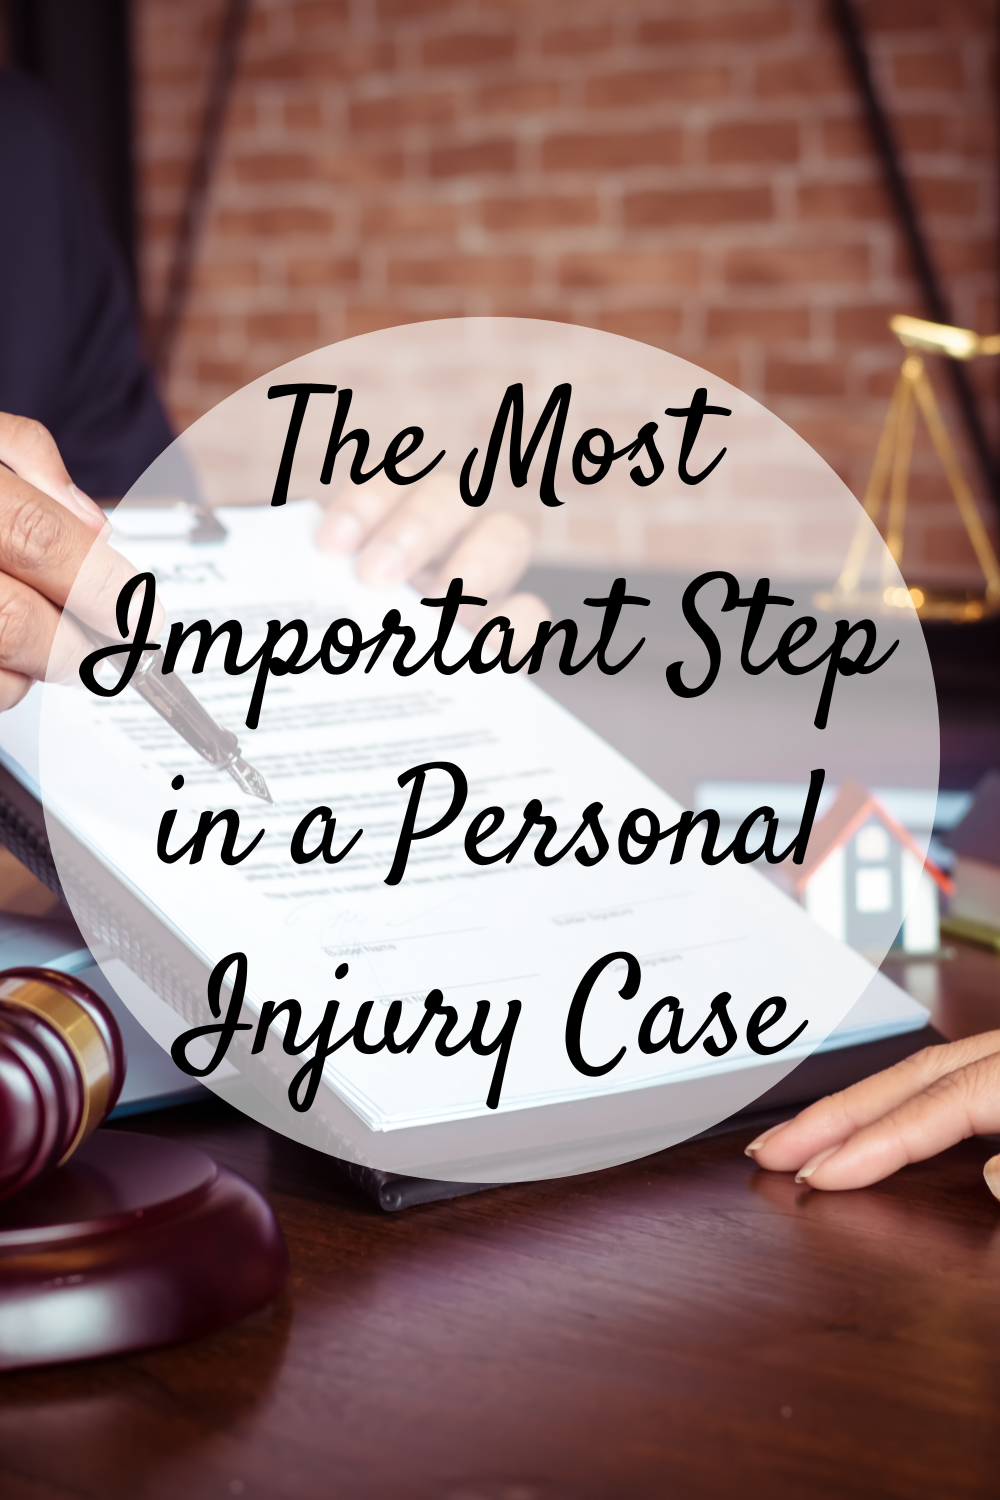 The Most Important Step in a Personal Injury Case